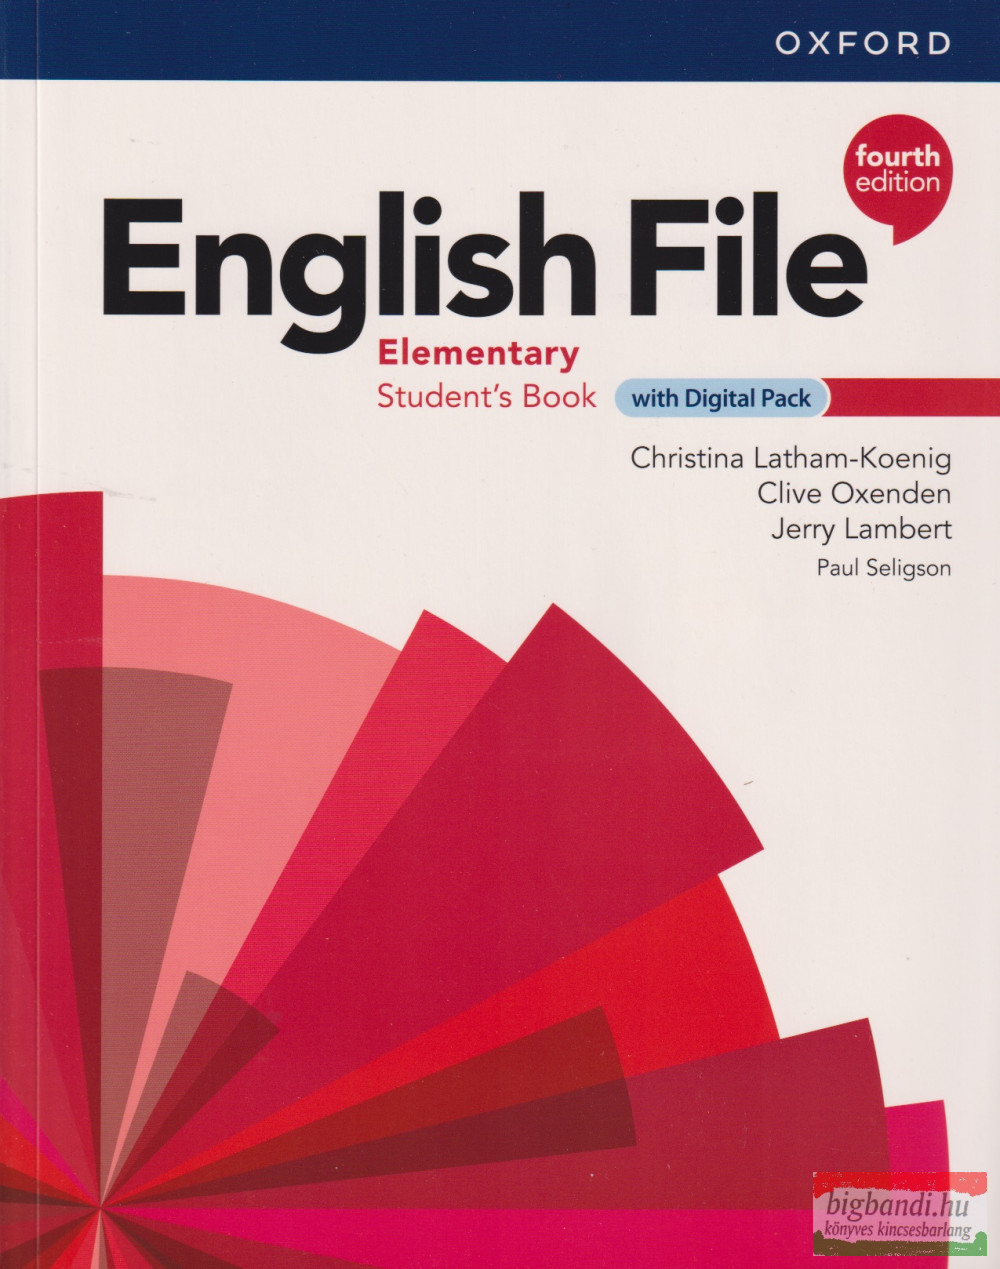 English File Elementary Student's Book with Digital Pack fourth edition